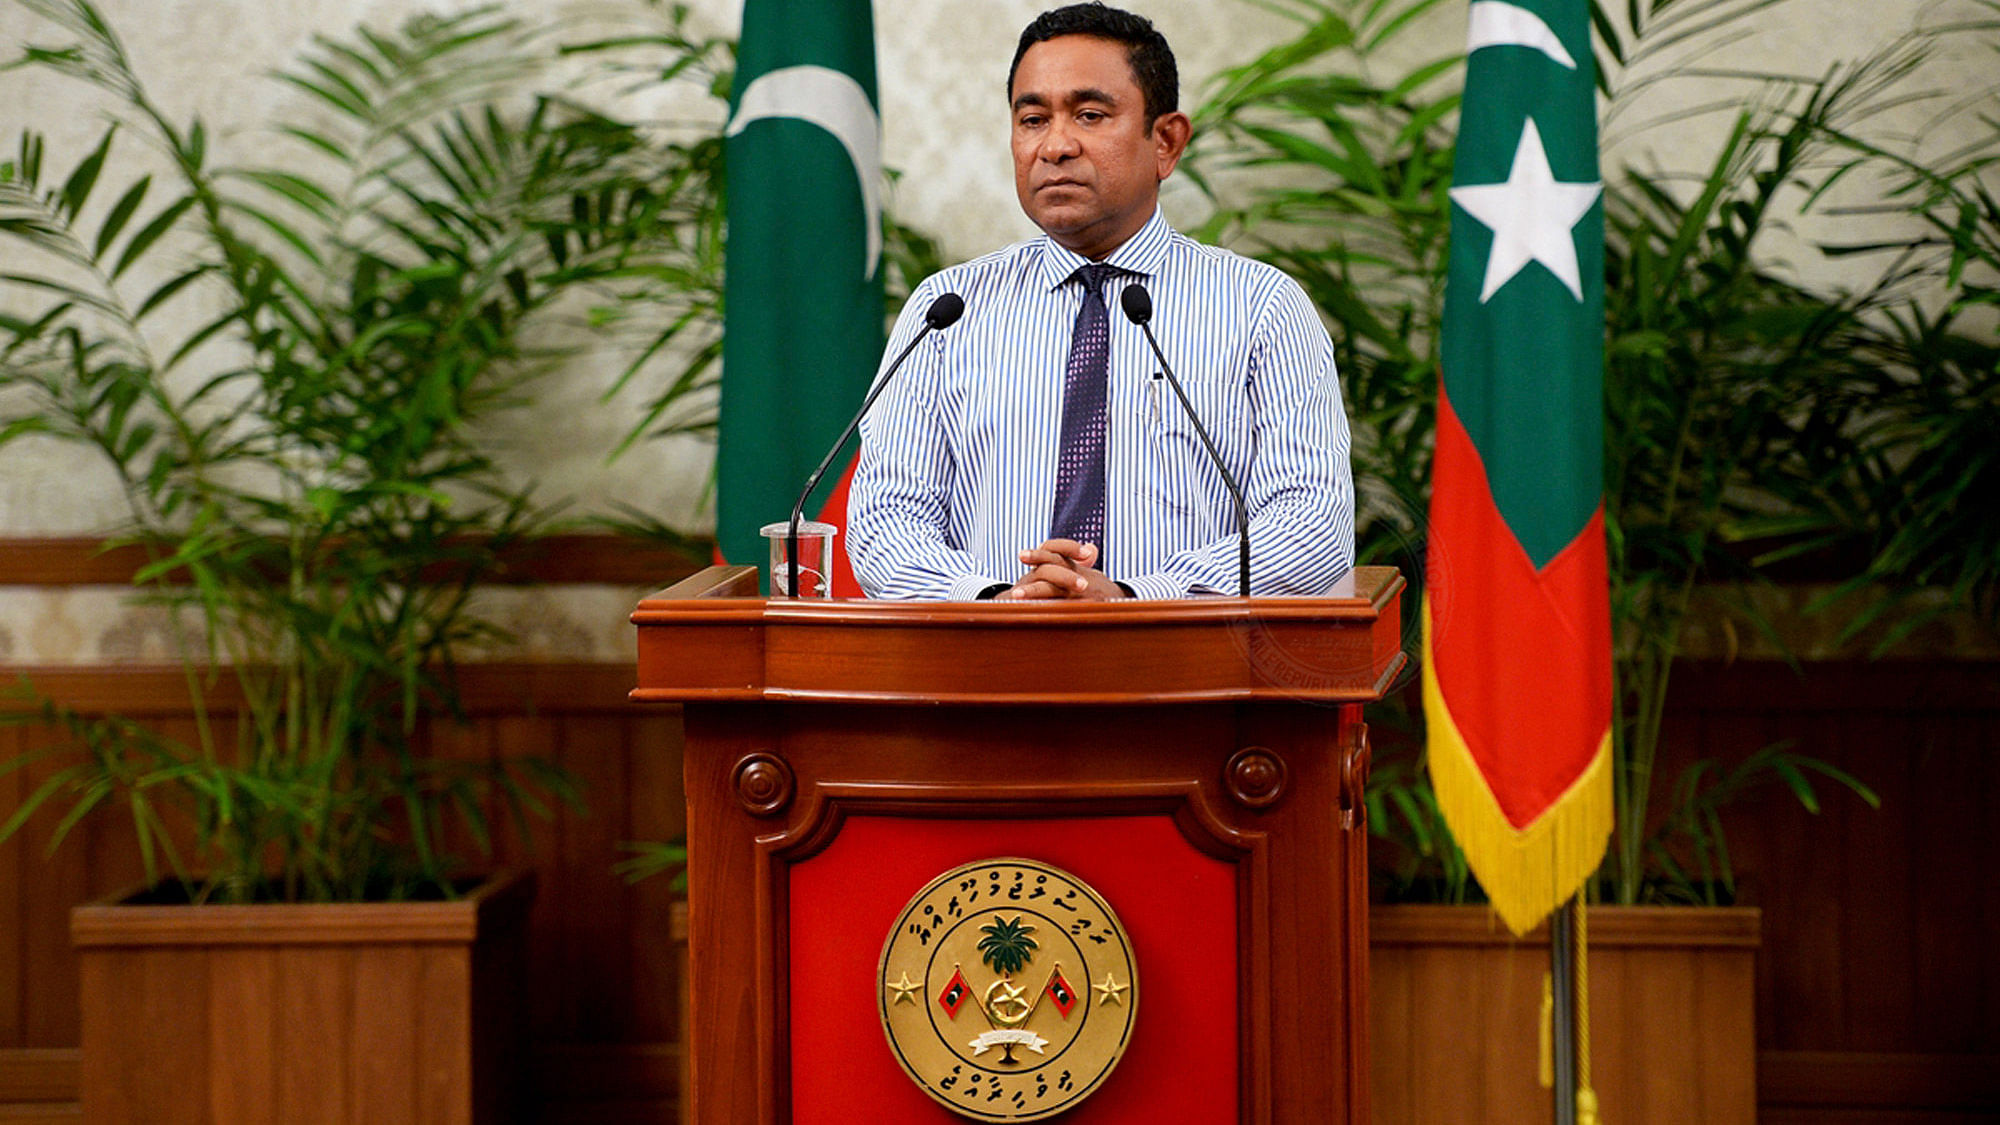 Maldives President Yameen Abdul Gayoom addressing the nation in Male, Maldives.File Photo. (Photo: AP)